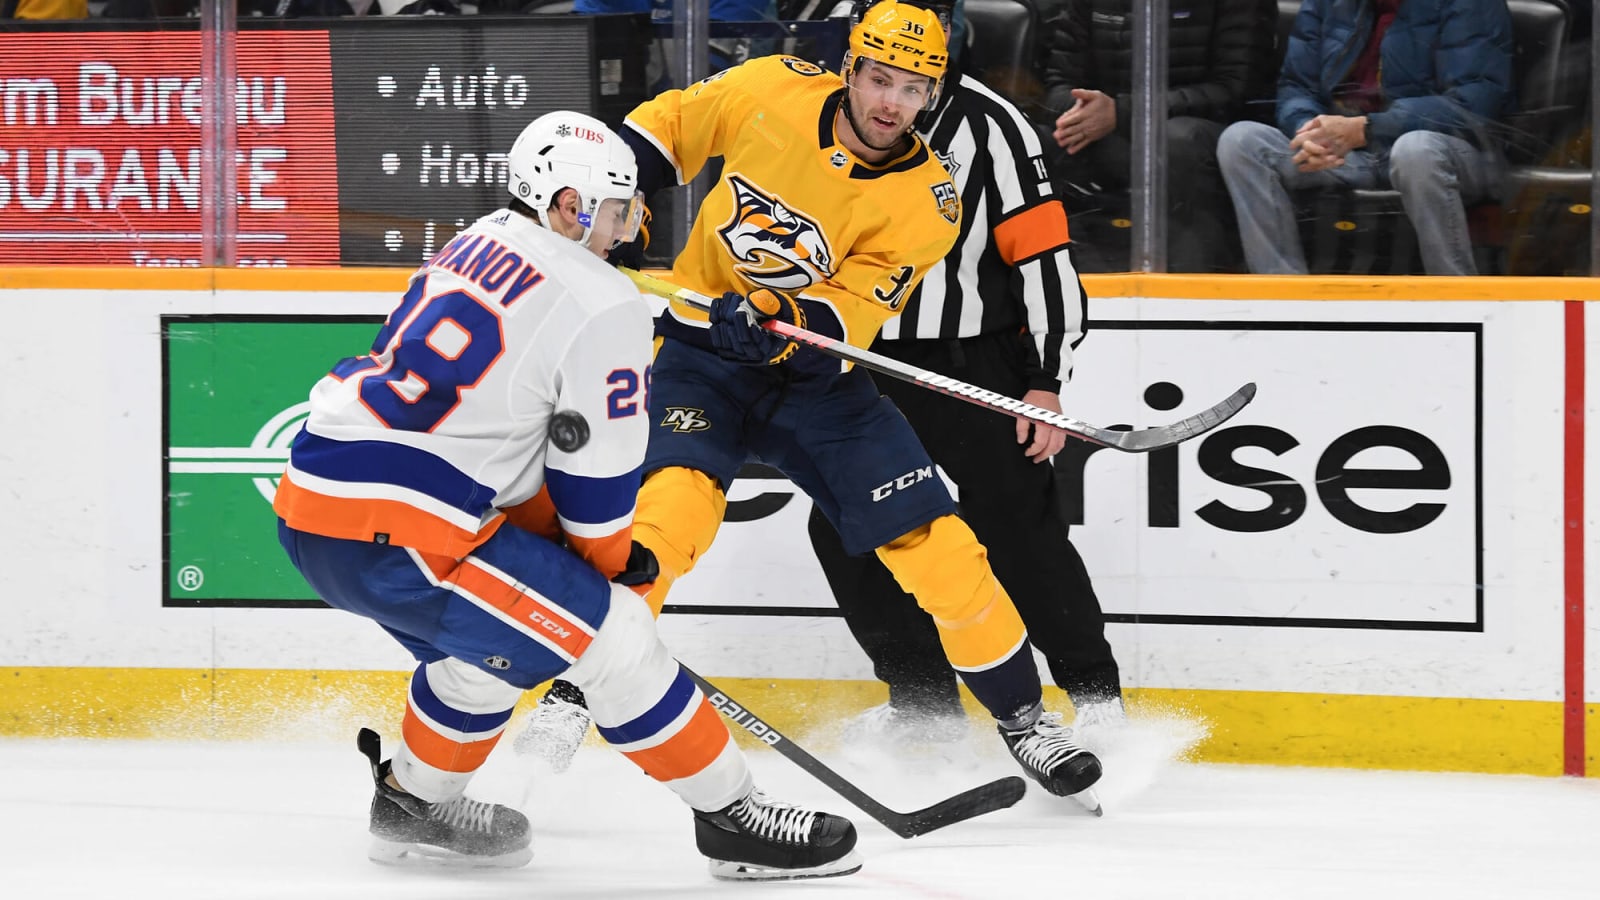 Nashville Predators sign Cole Smith to two-year, $2 million extension